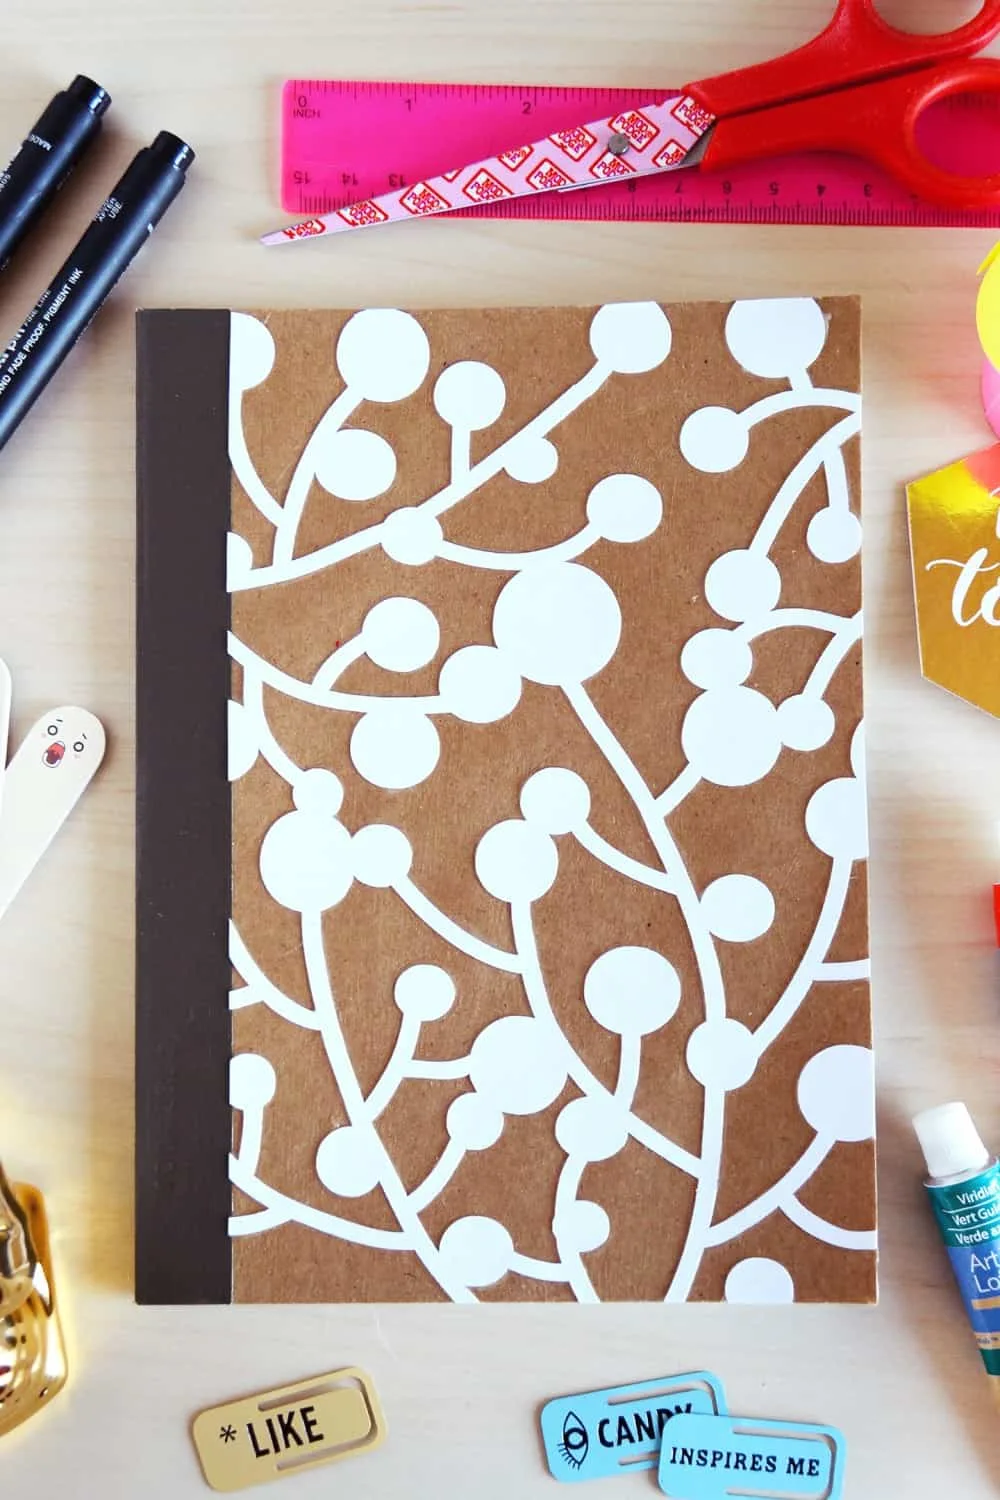 How to decorate a notebook with die cut paper and Mod Podge